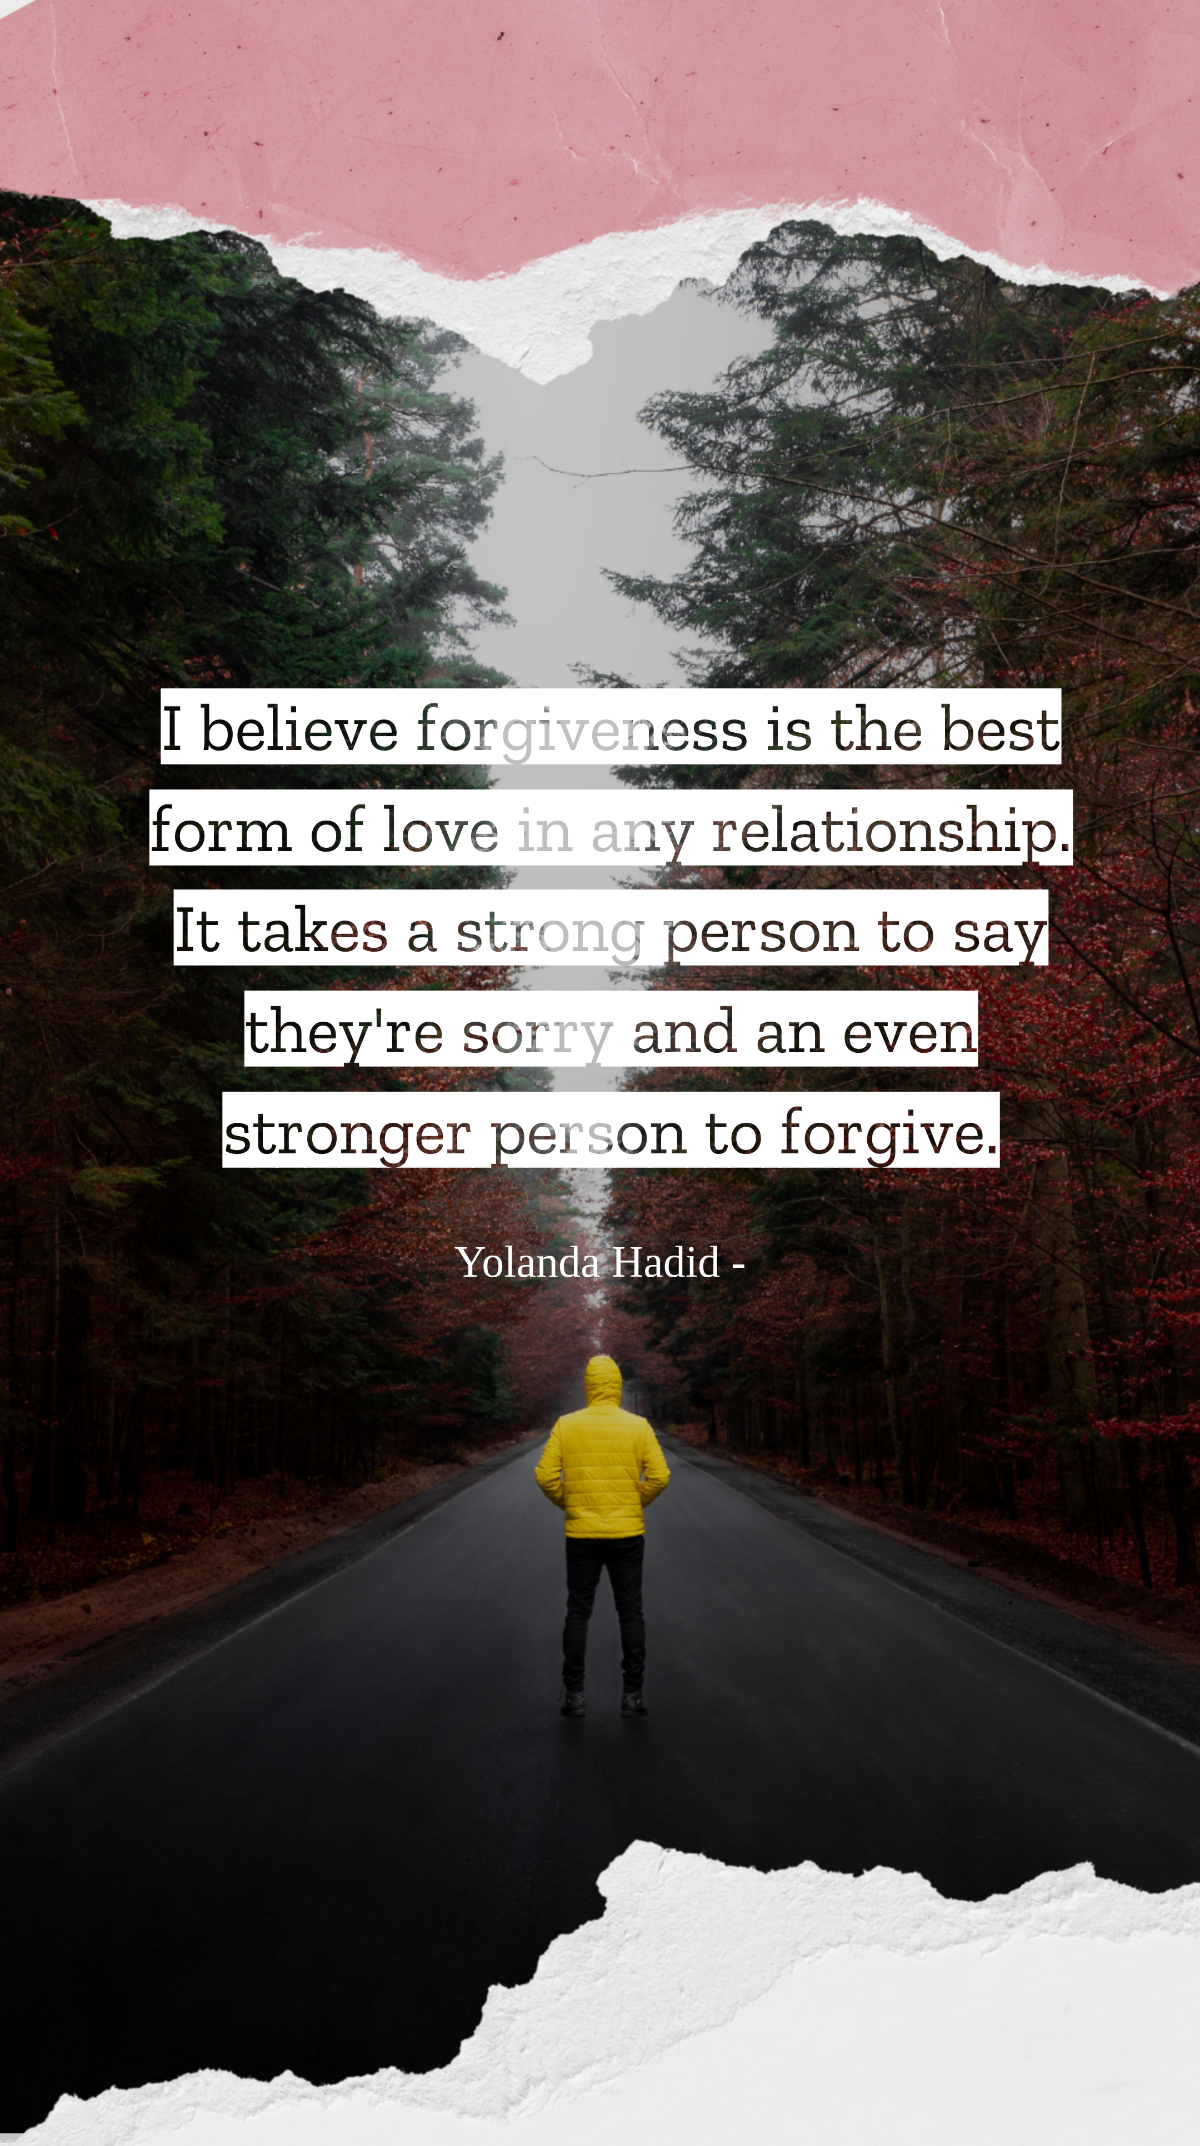 Yolanda Hadid - I believe forgiveness is the best form of love in any relationship. It takes a strong person to say they're sorry and an even stronger person to forgive. Template